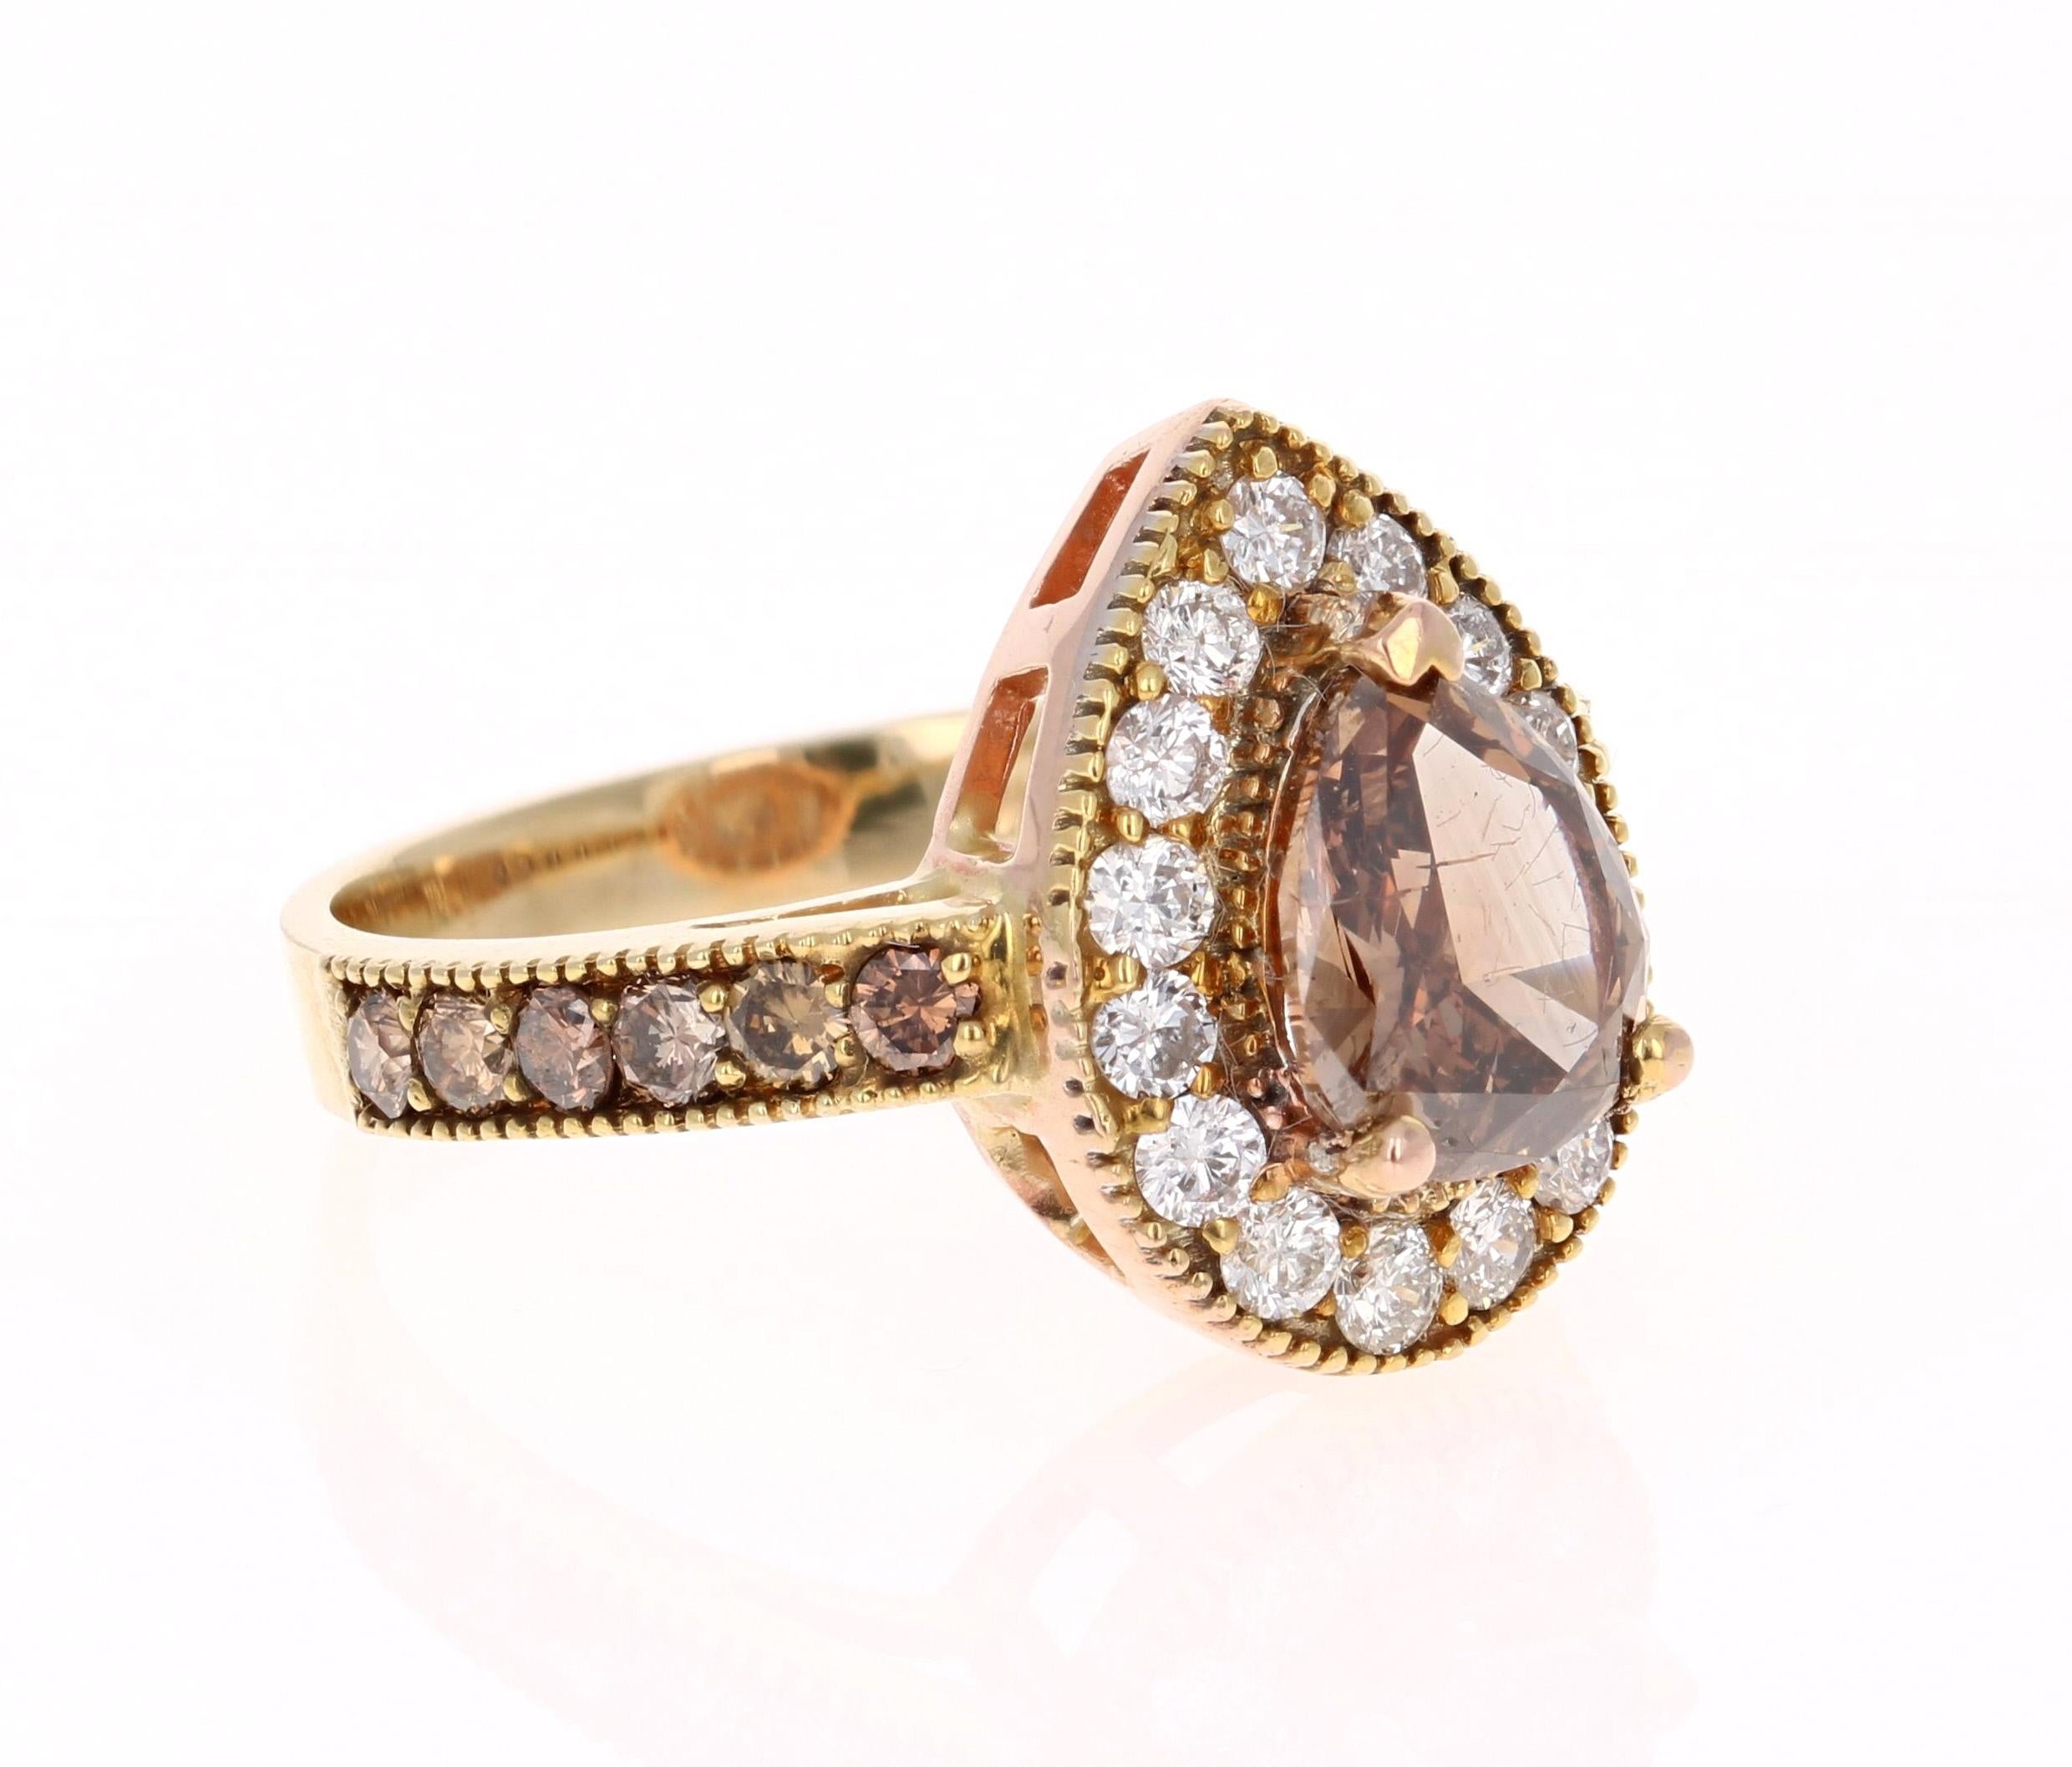 This beauty has a deep Brown/Champagne colored natural Pear Cut Diamond that weighs 1.68 Carats. It is surrounded by a halo of 15 Round Cut Diamonds that weigh 0.57 Carats. The clarity and color of the diamonds are SI1-G. The sides of the ring have